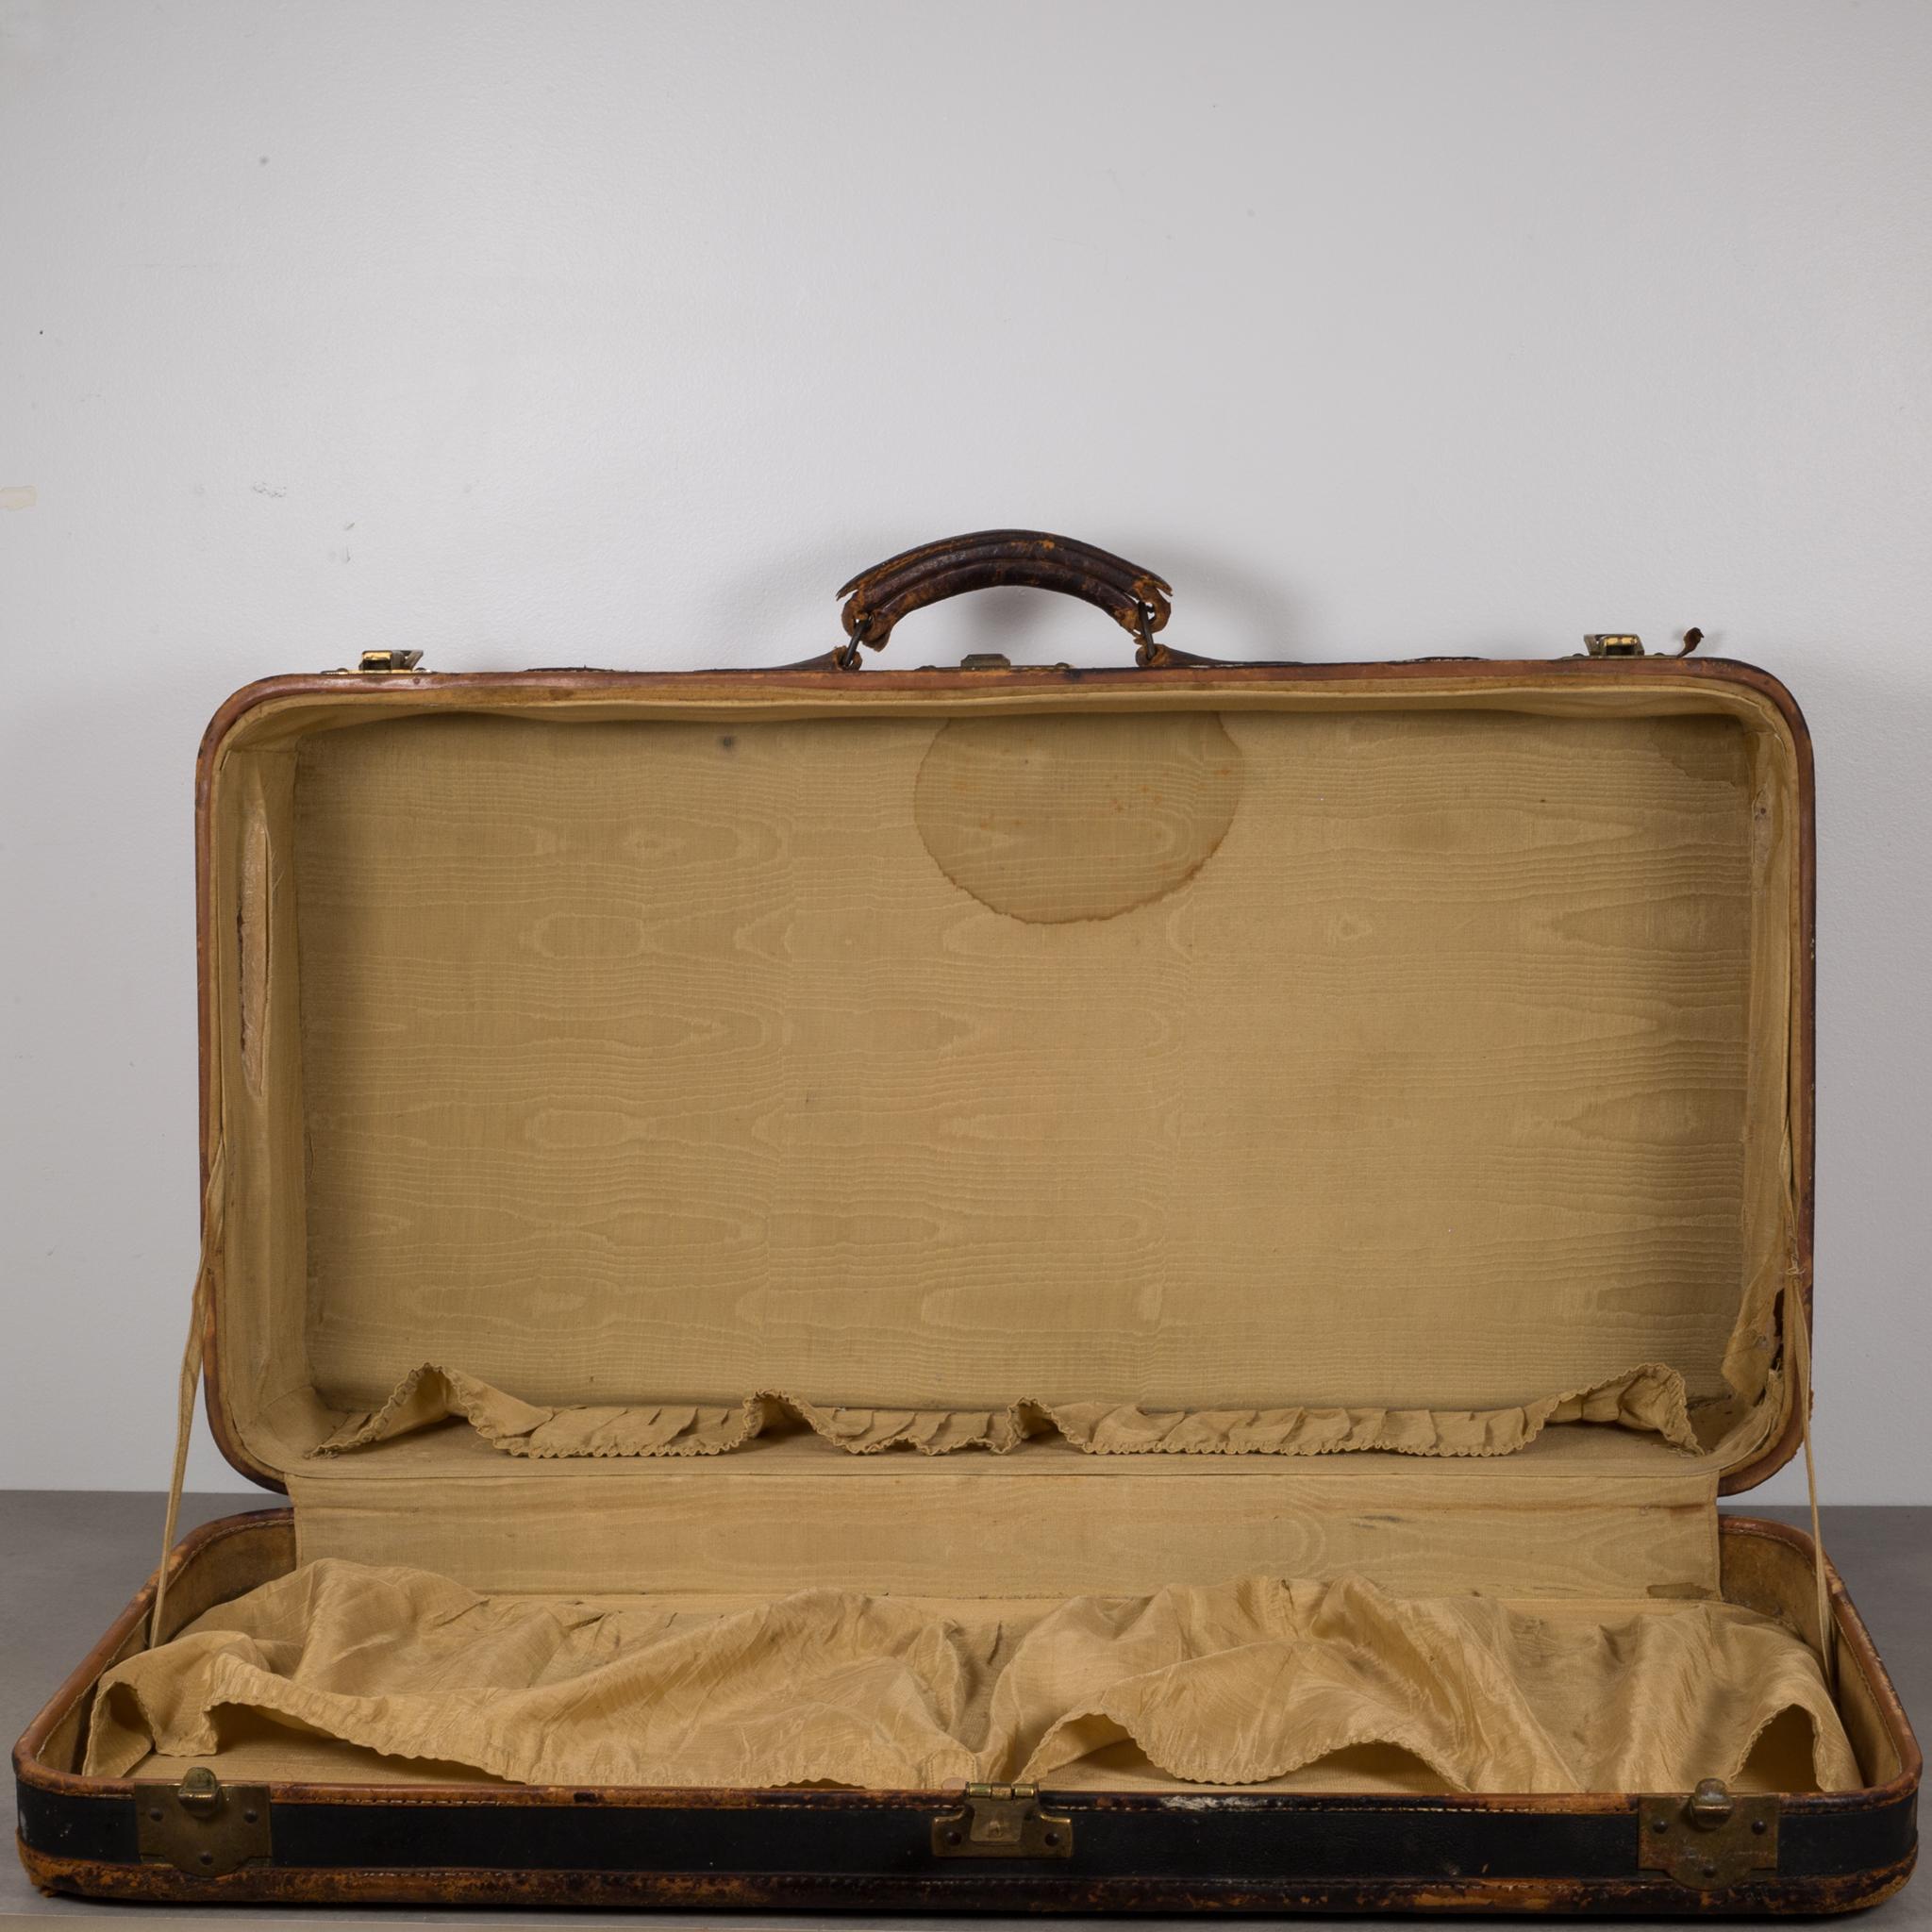 20th Century Antique French Suitcase with Original Travel Stickers, circa 1900-1930